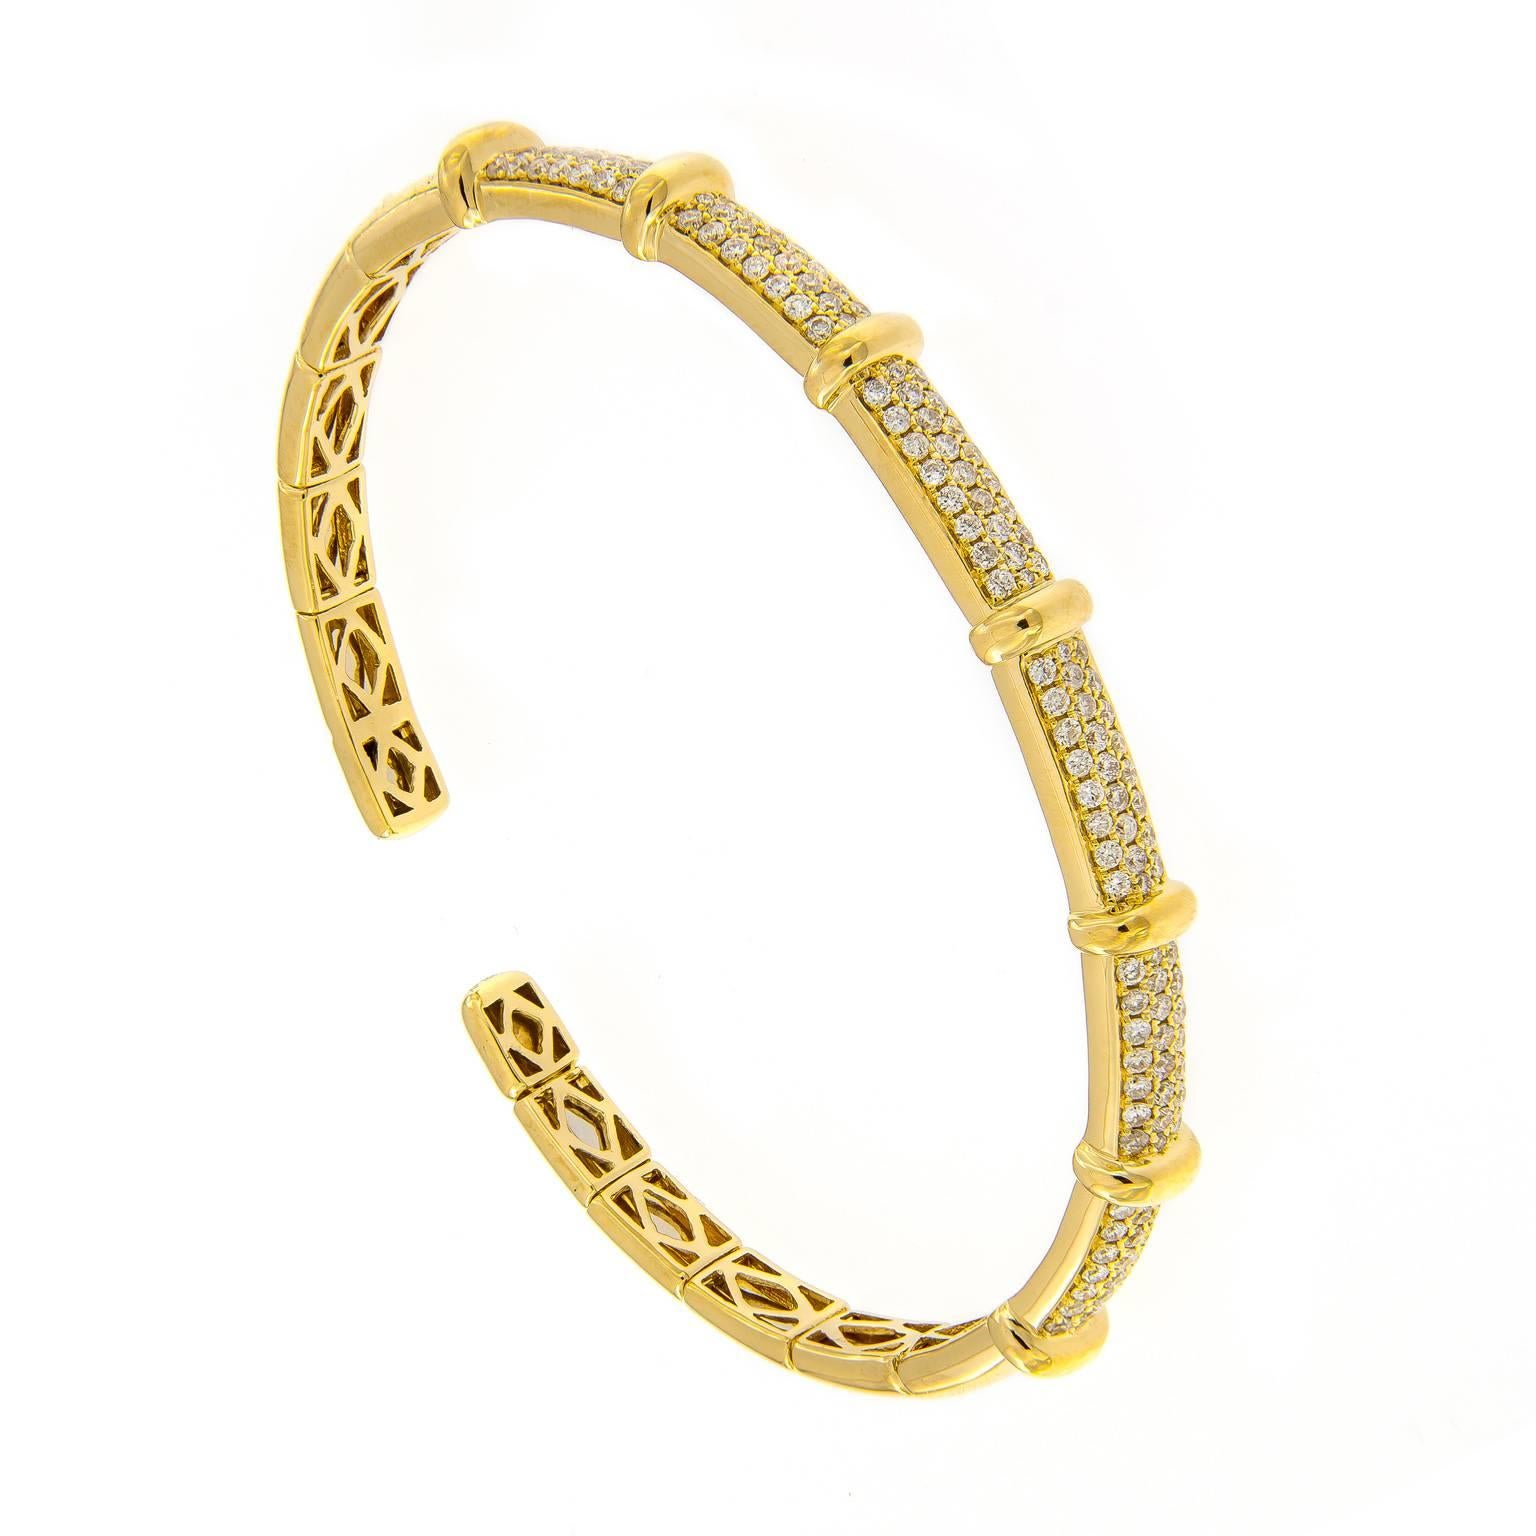 Three rows of round brilliant cut diamonds separated by gold bar stations are beautifully crafted in 18k yellow gold. Striking on it’s own or stack two or more to create a bolder look. Bracelet is flexible. Inner diameter 2 in w 2.25 in. 6 mm